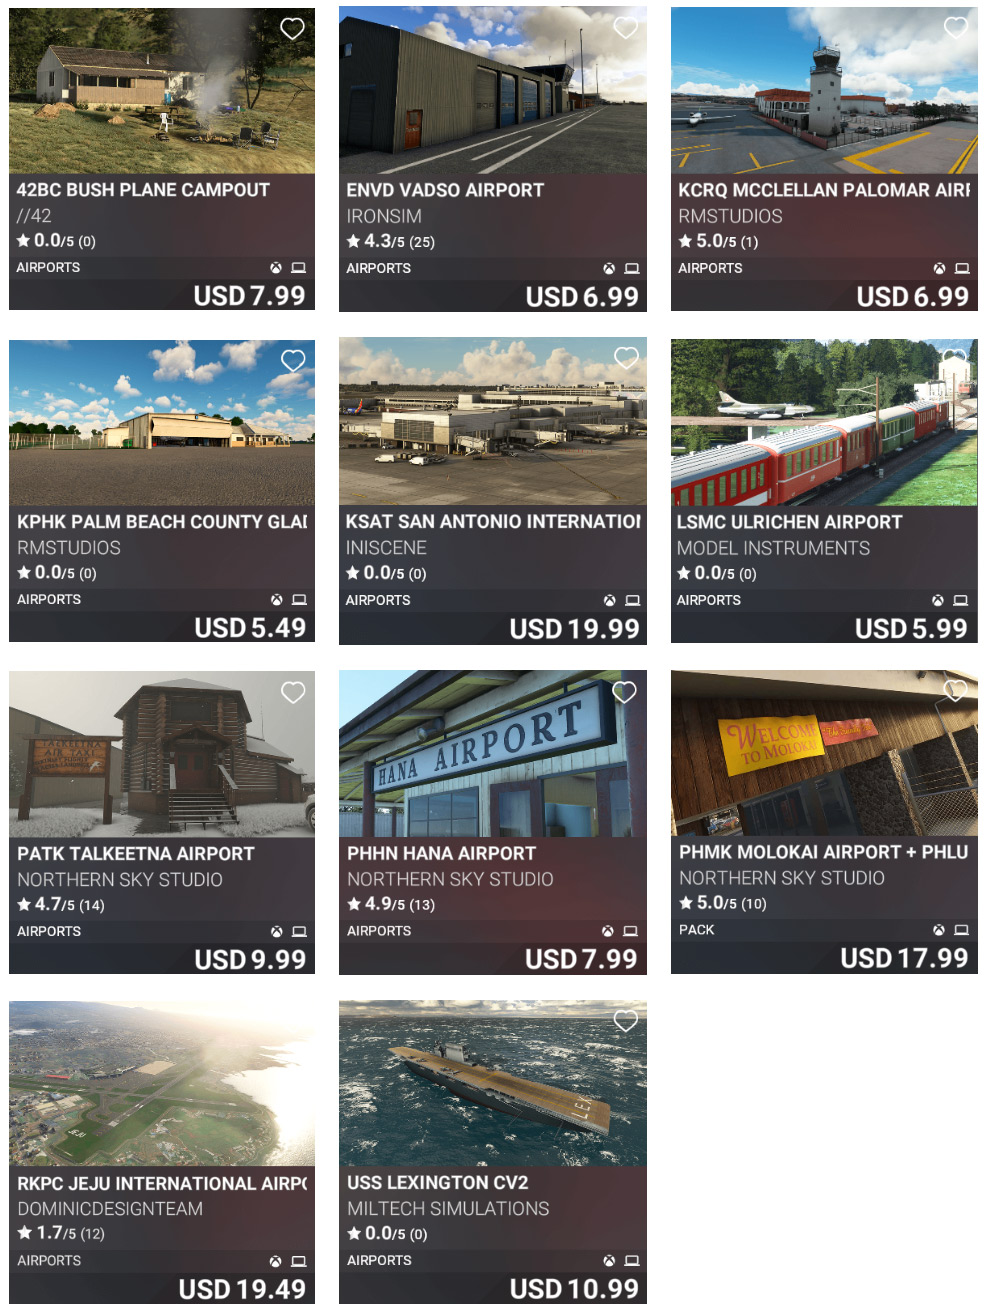 msfs marketplace update sept 22 2022 airports